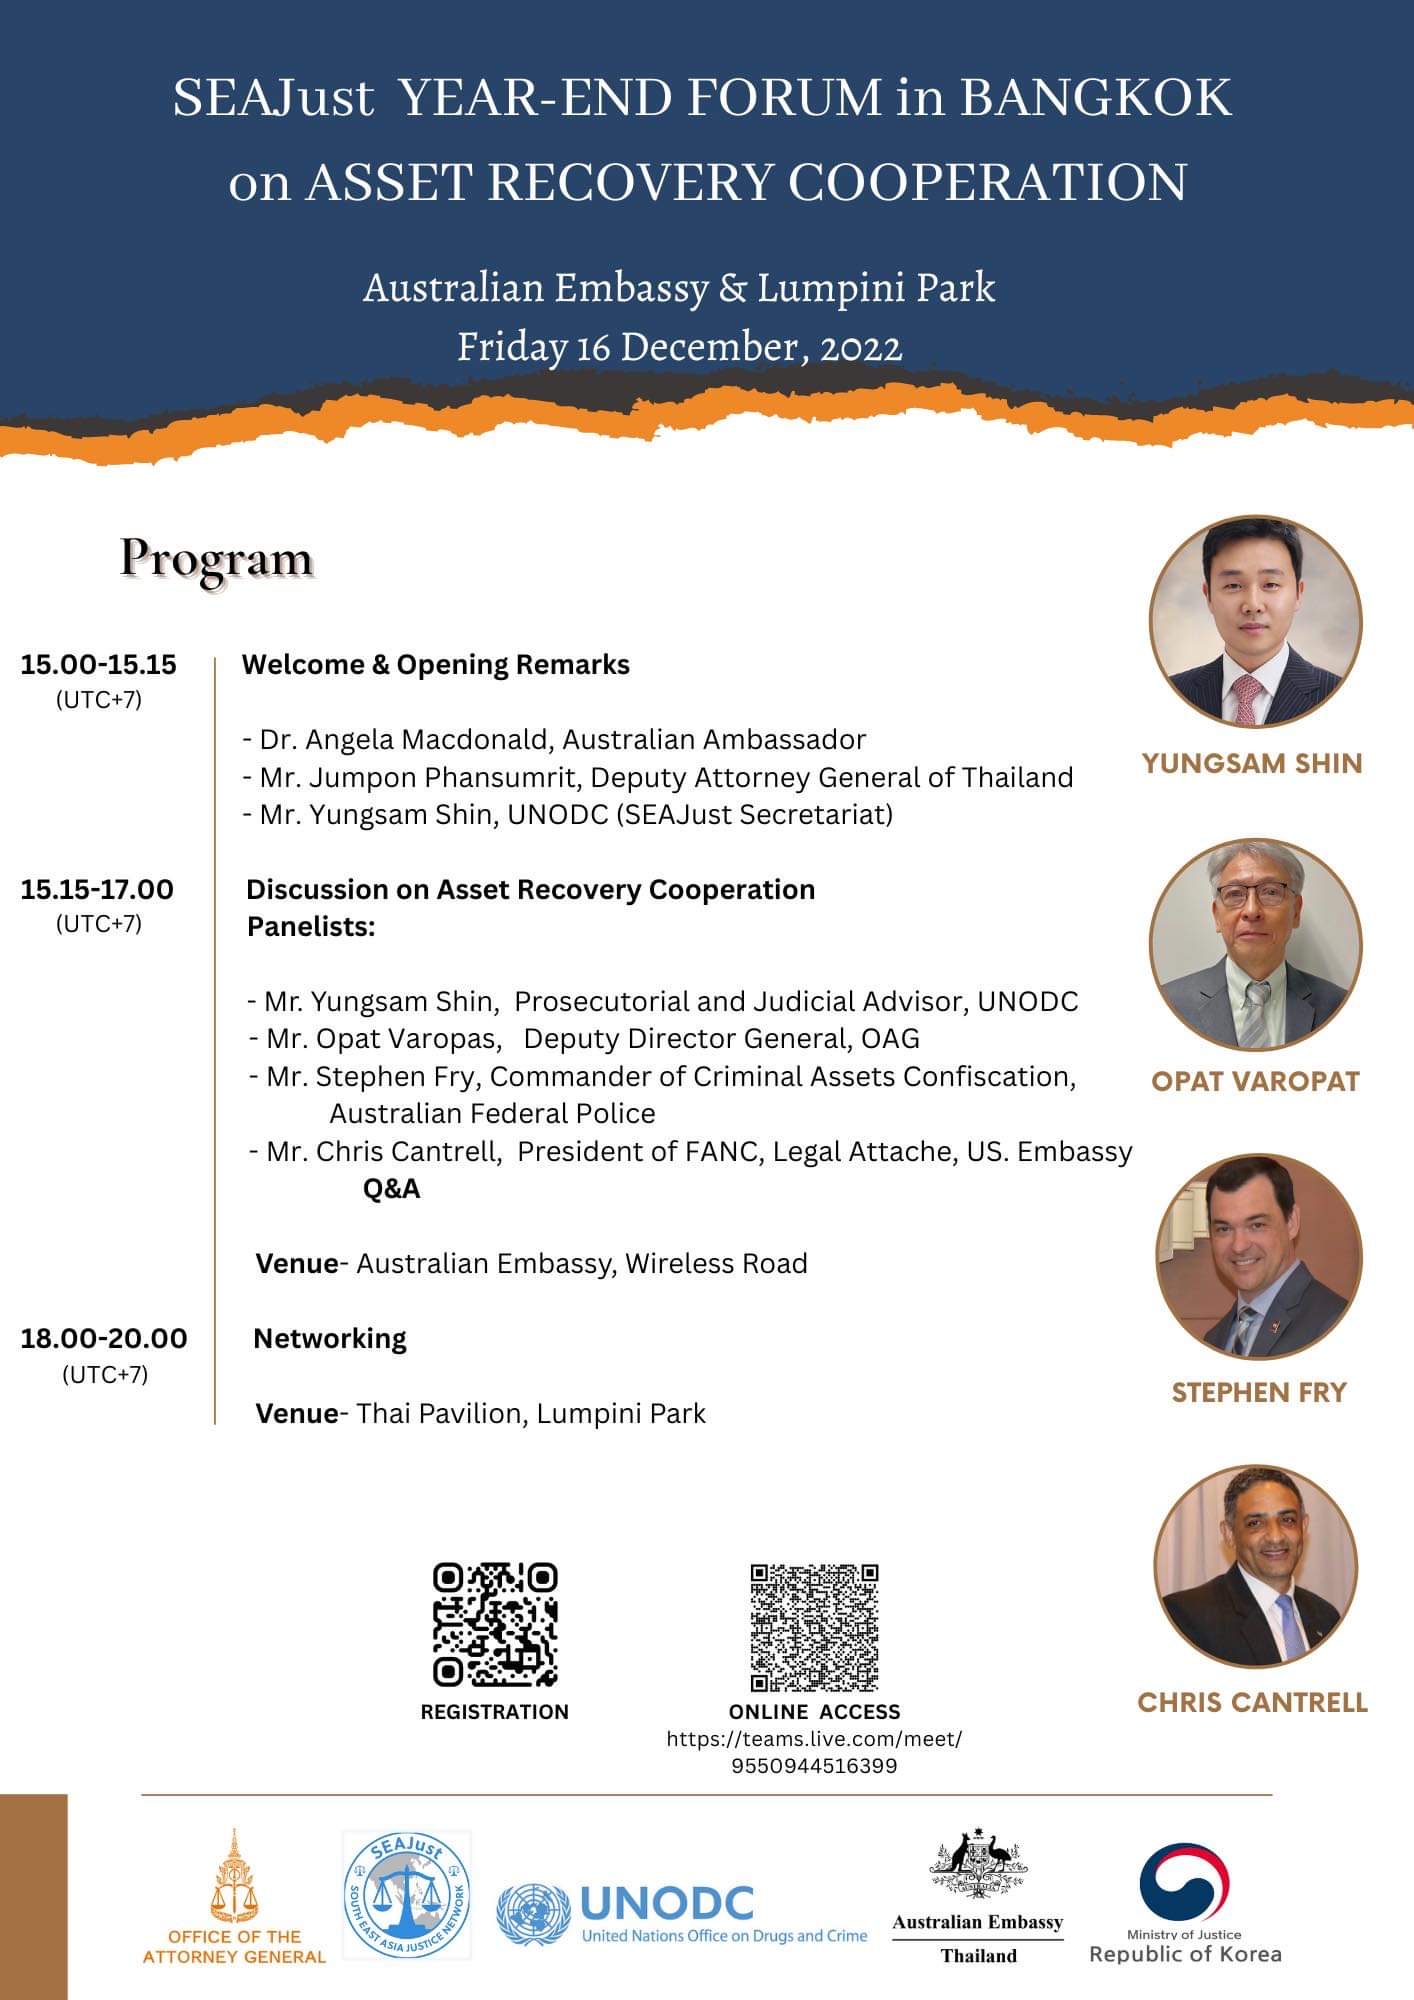 SEAJust year-end forum on asset recovery